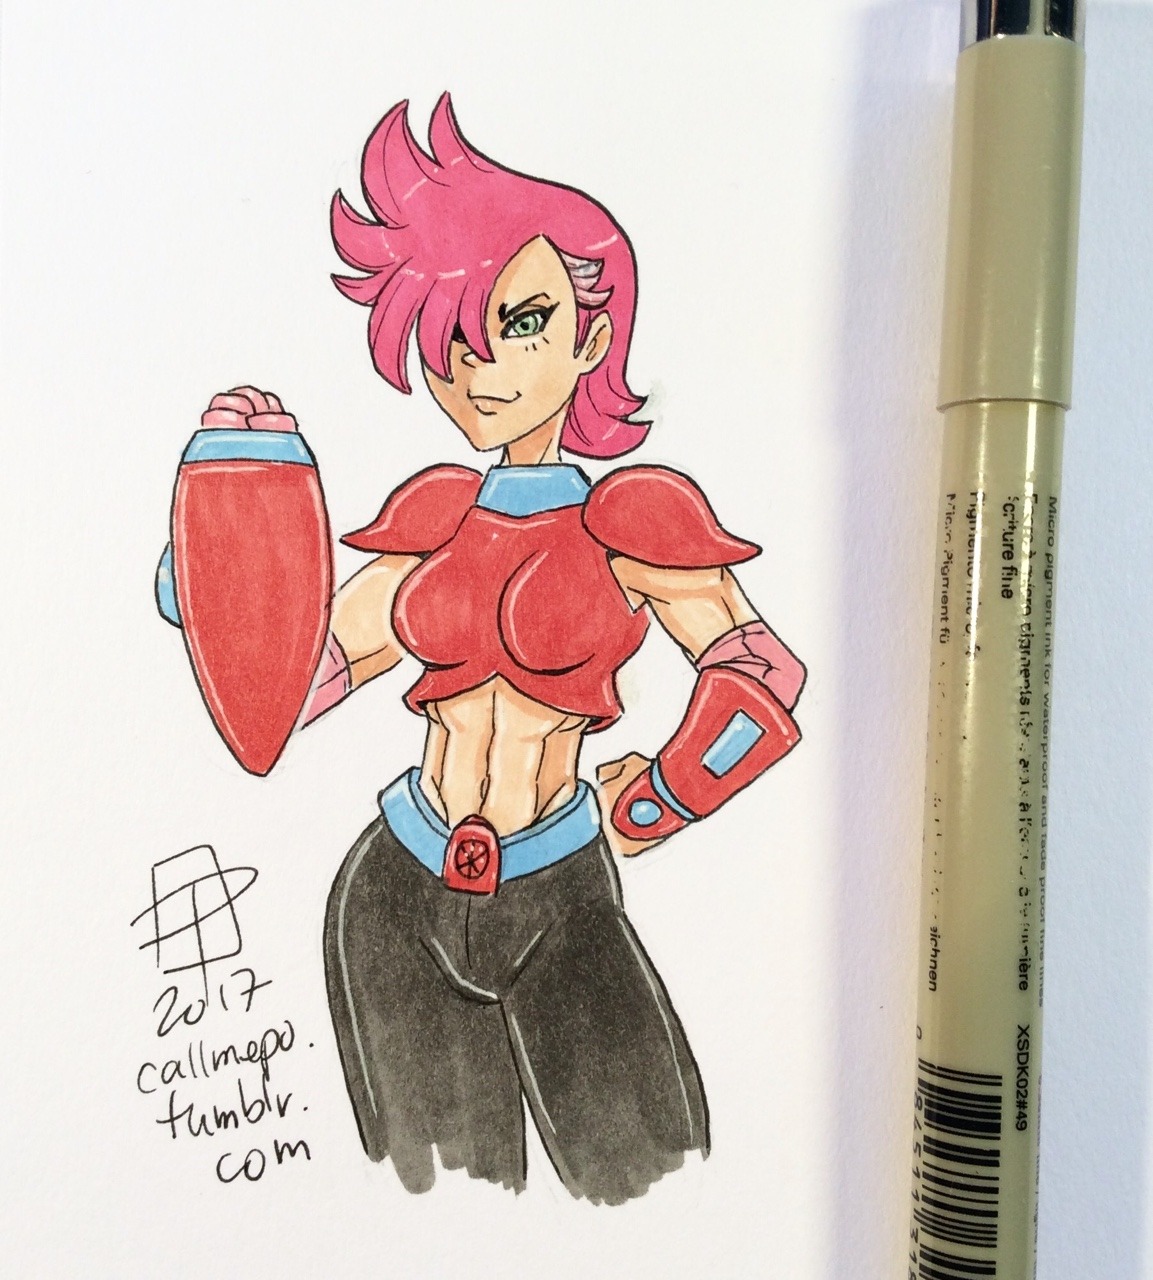 callmepo: Tiny doodle of Red Action from Ok KO. Kind of went for a Megaman vibe for